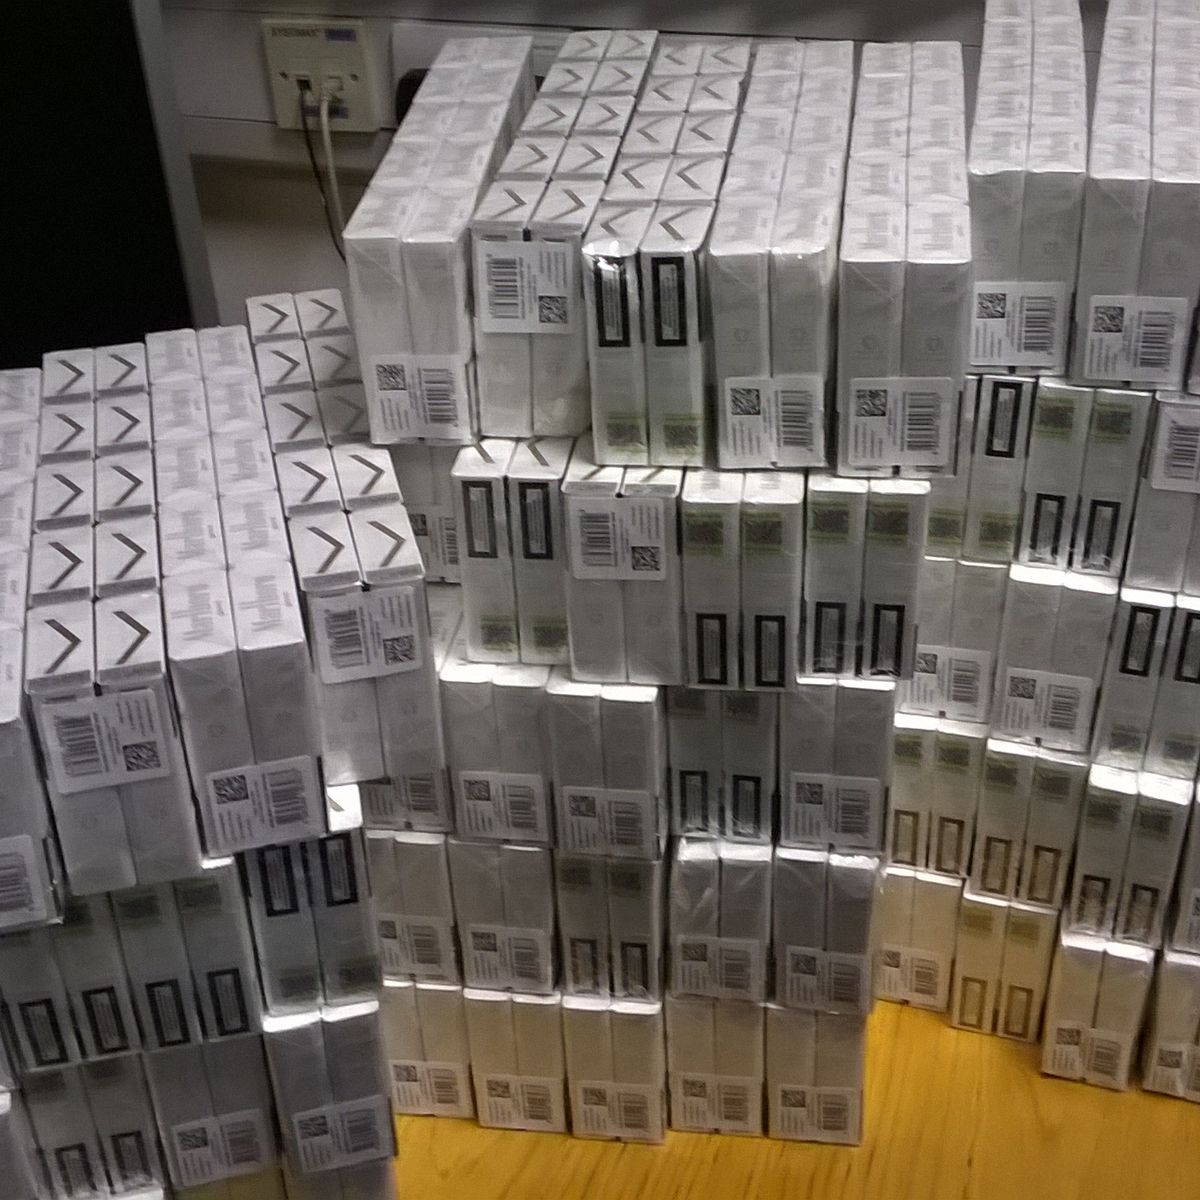 Man caught with 20,000 cigarettes said they were all for his family